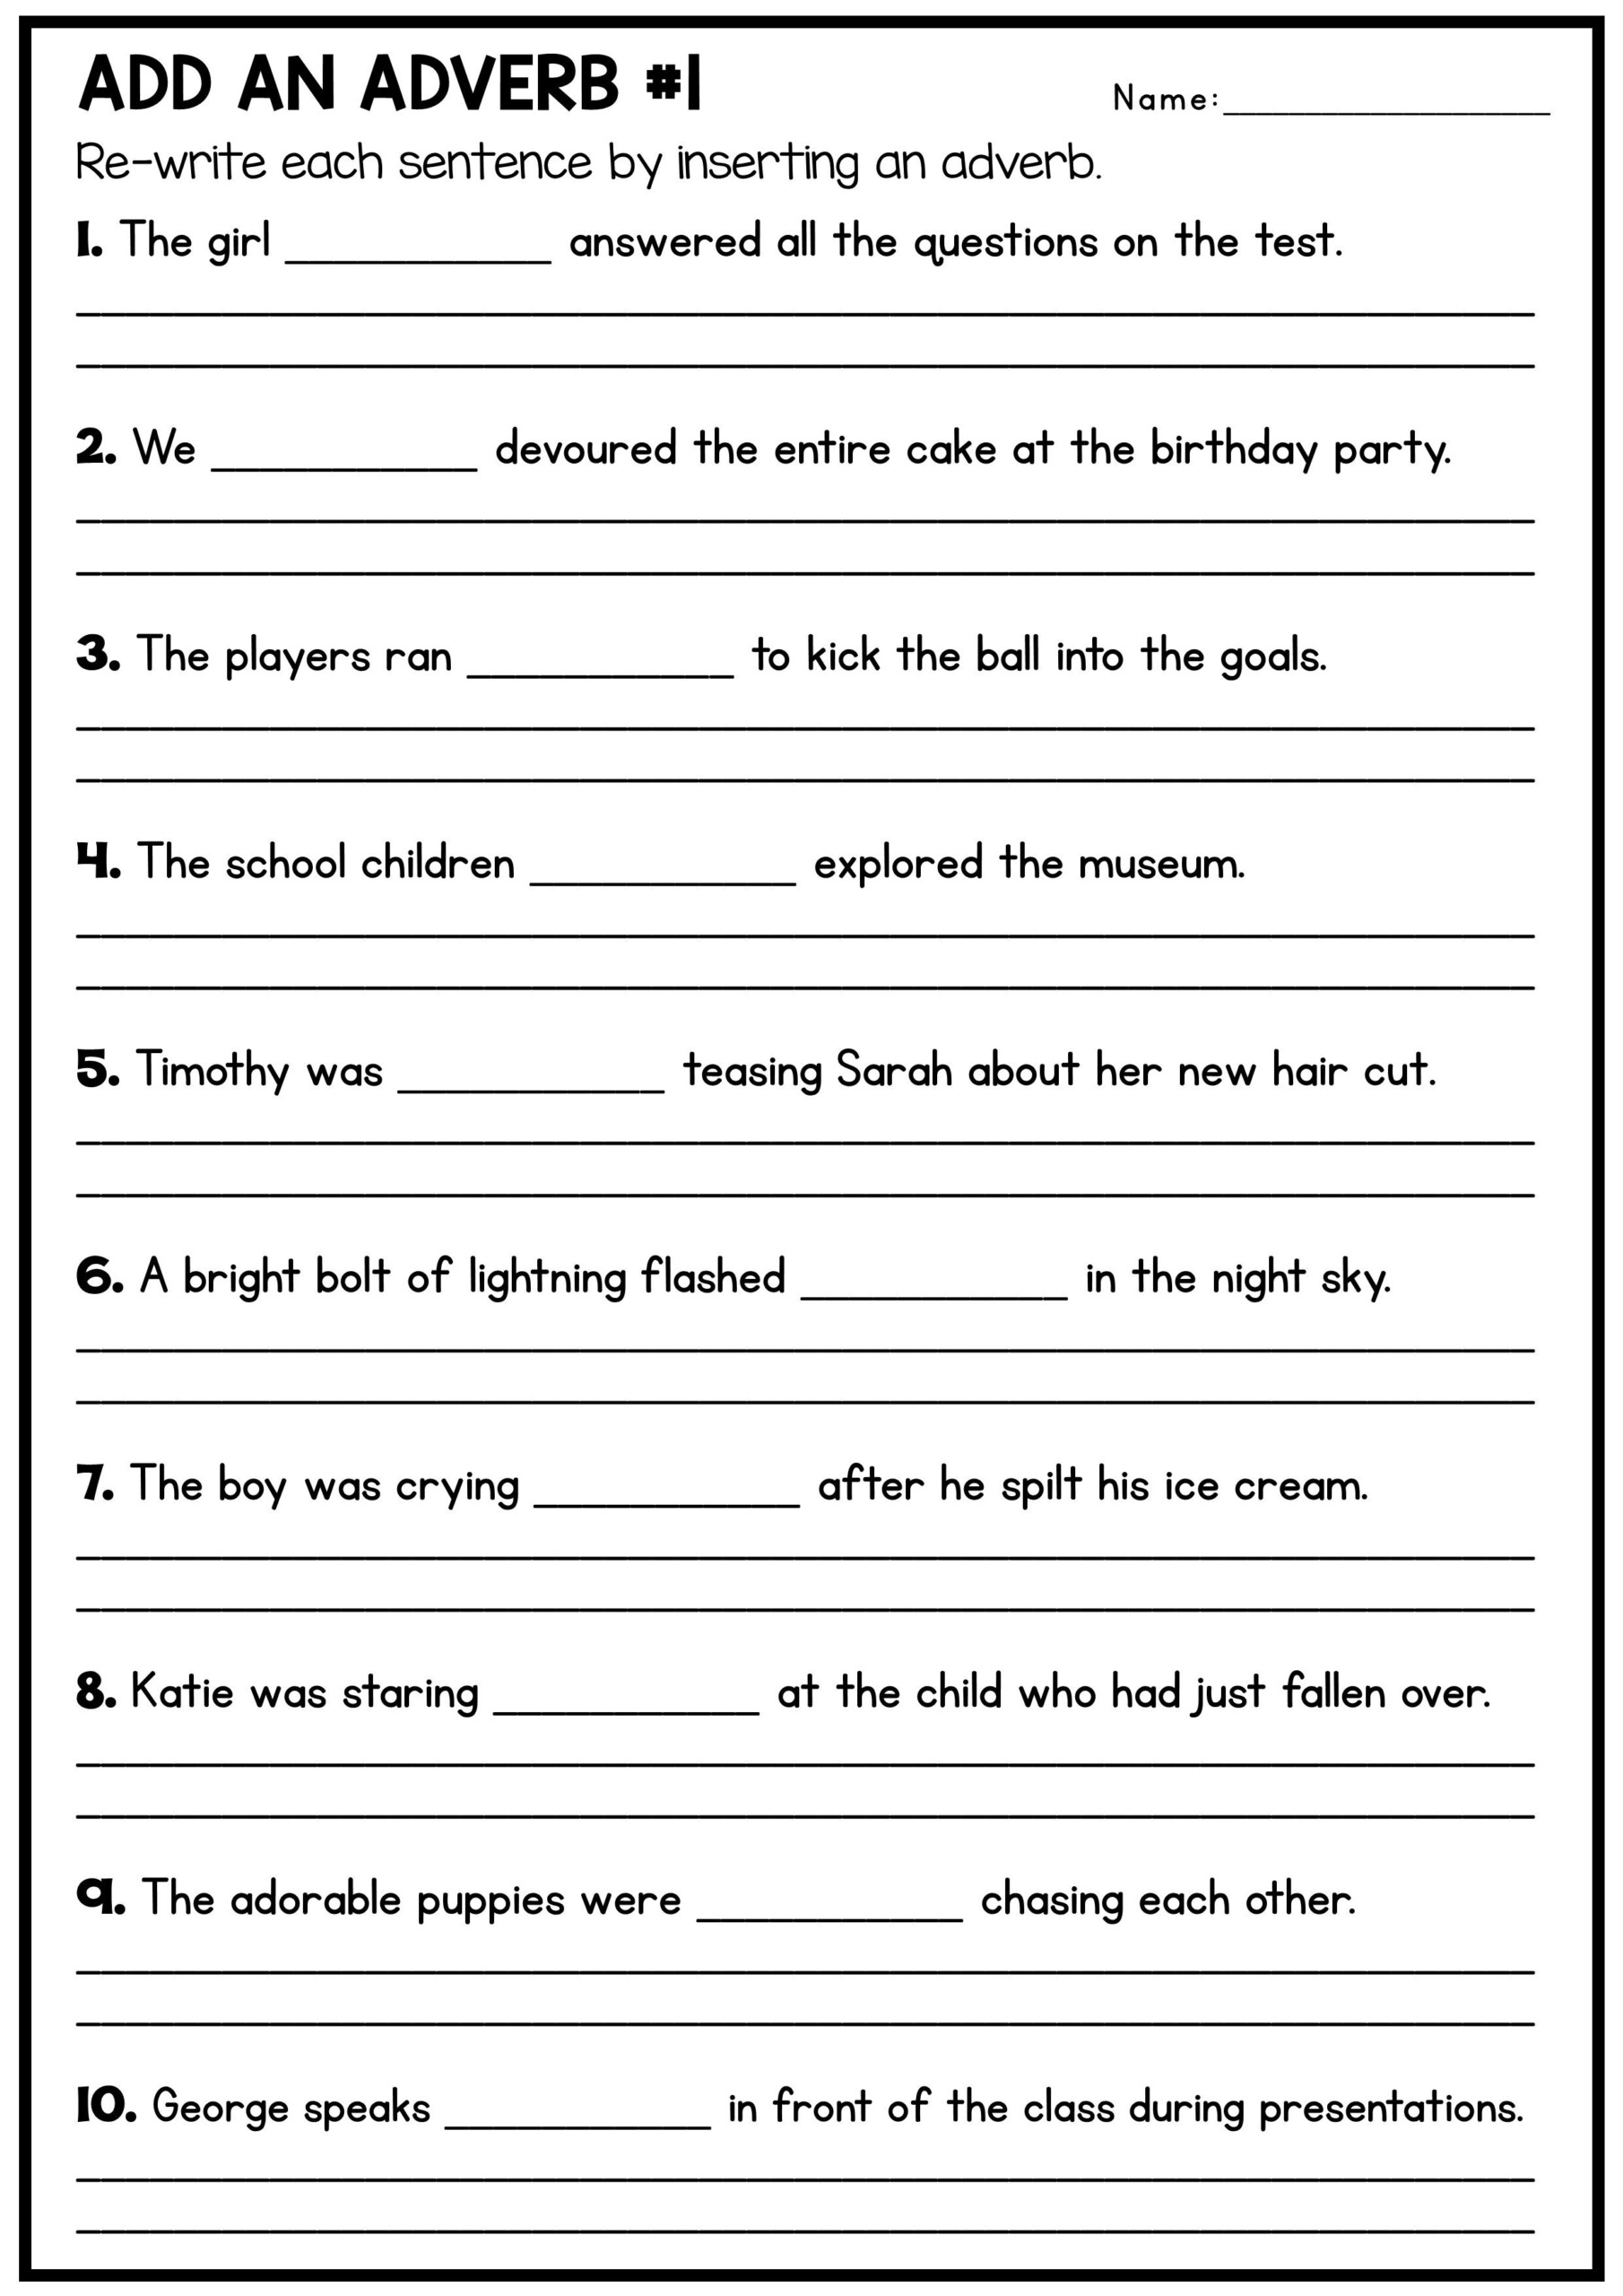 Add An Adverb To The Sentences Worksheet Adjectives Sentence